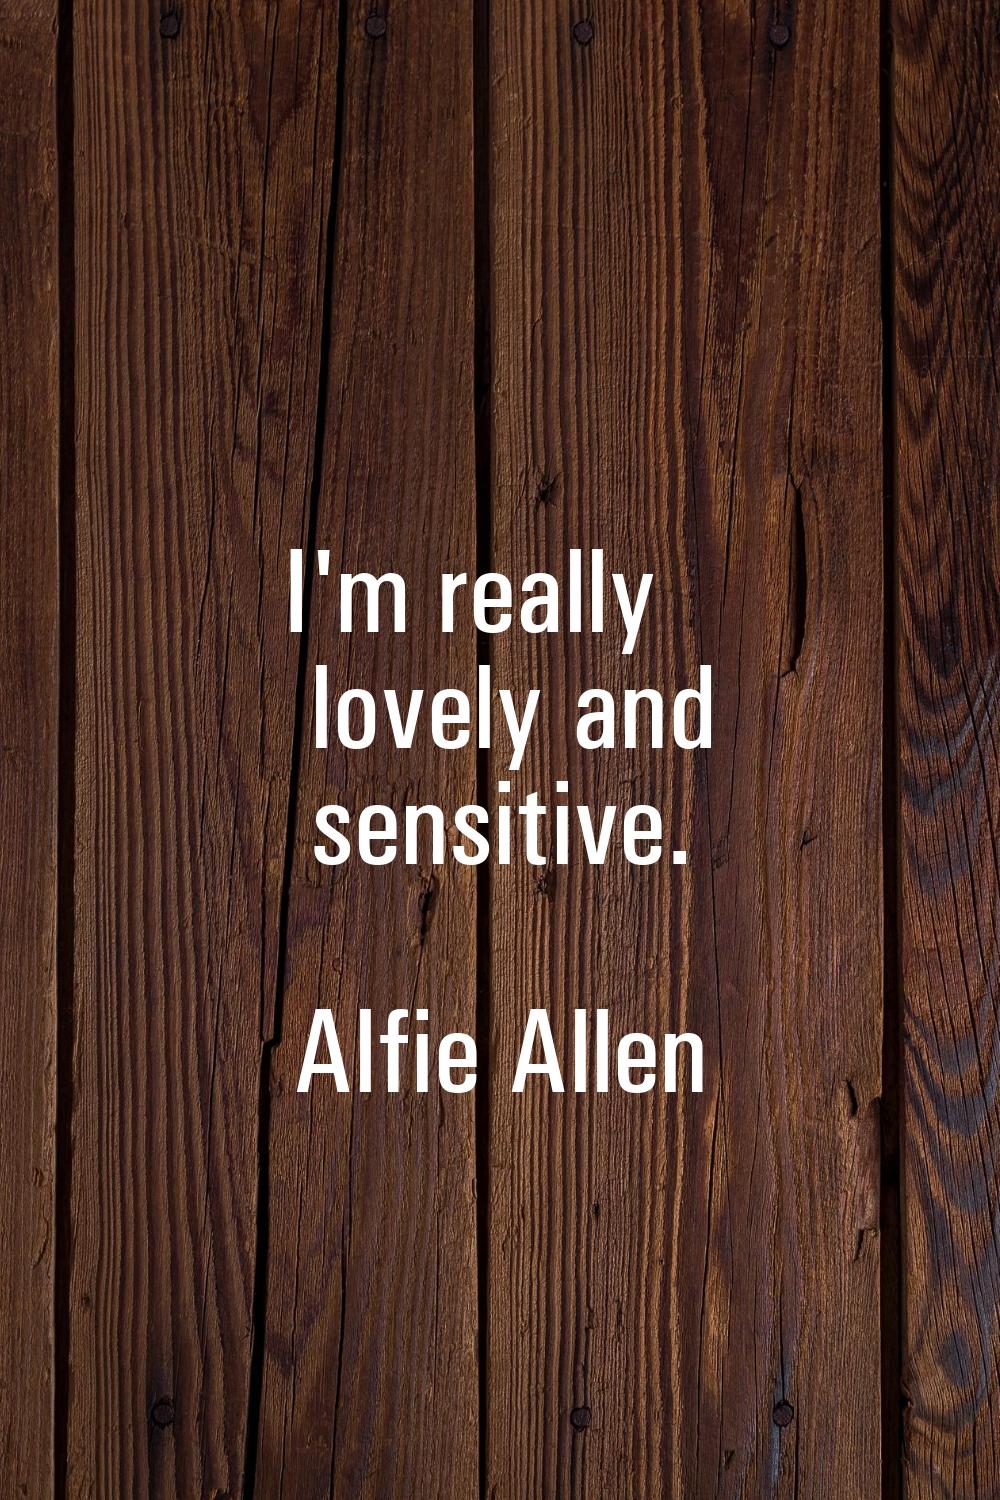 I'm really lovely and sensitive.